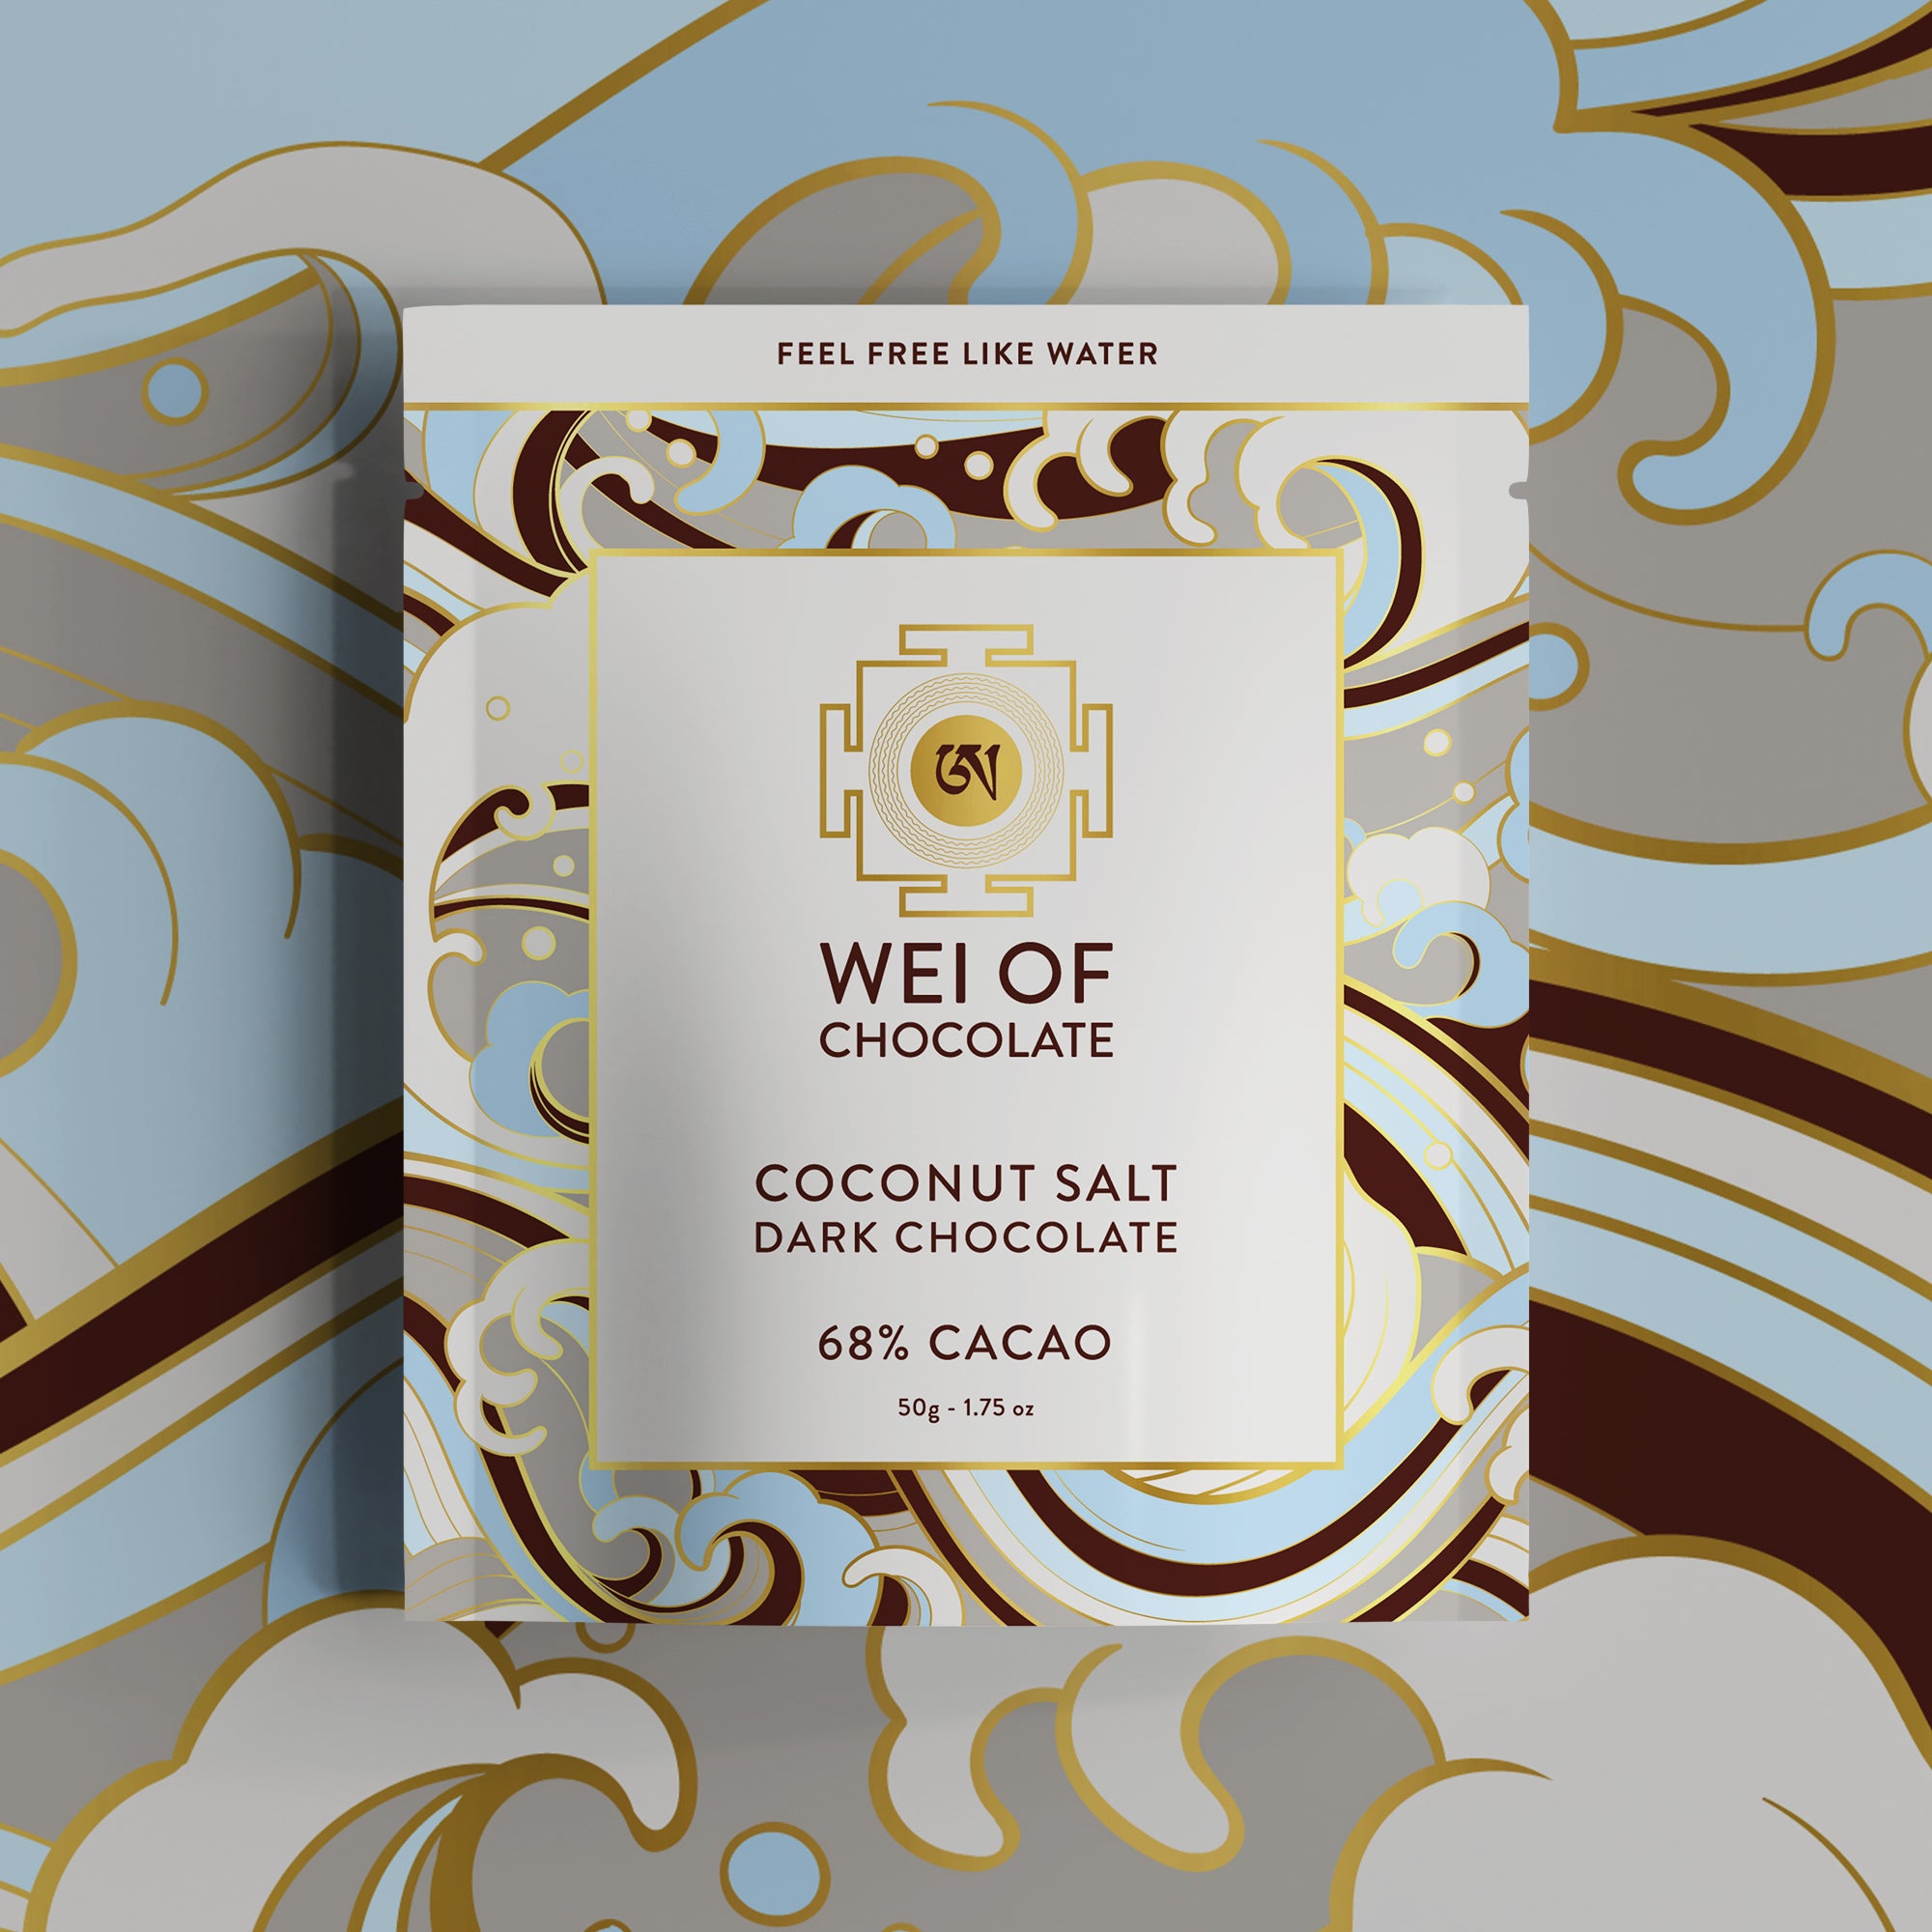 Wei of Chocolate